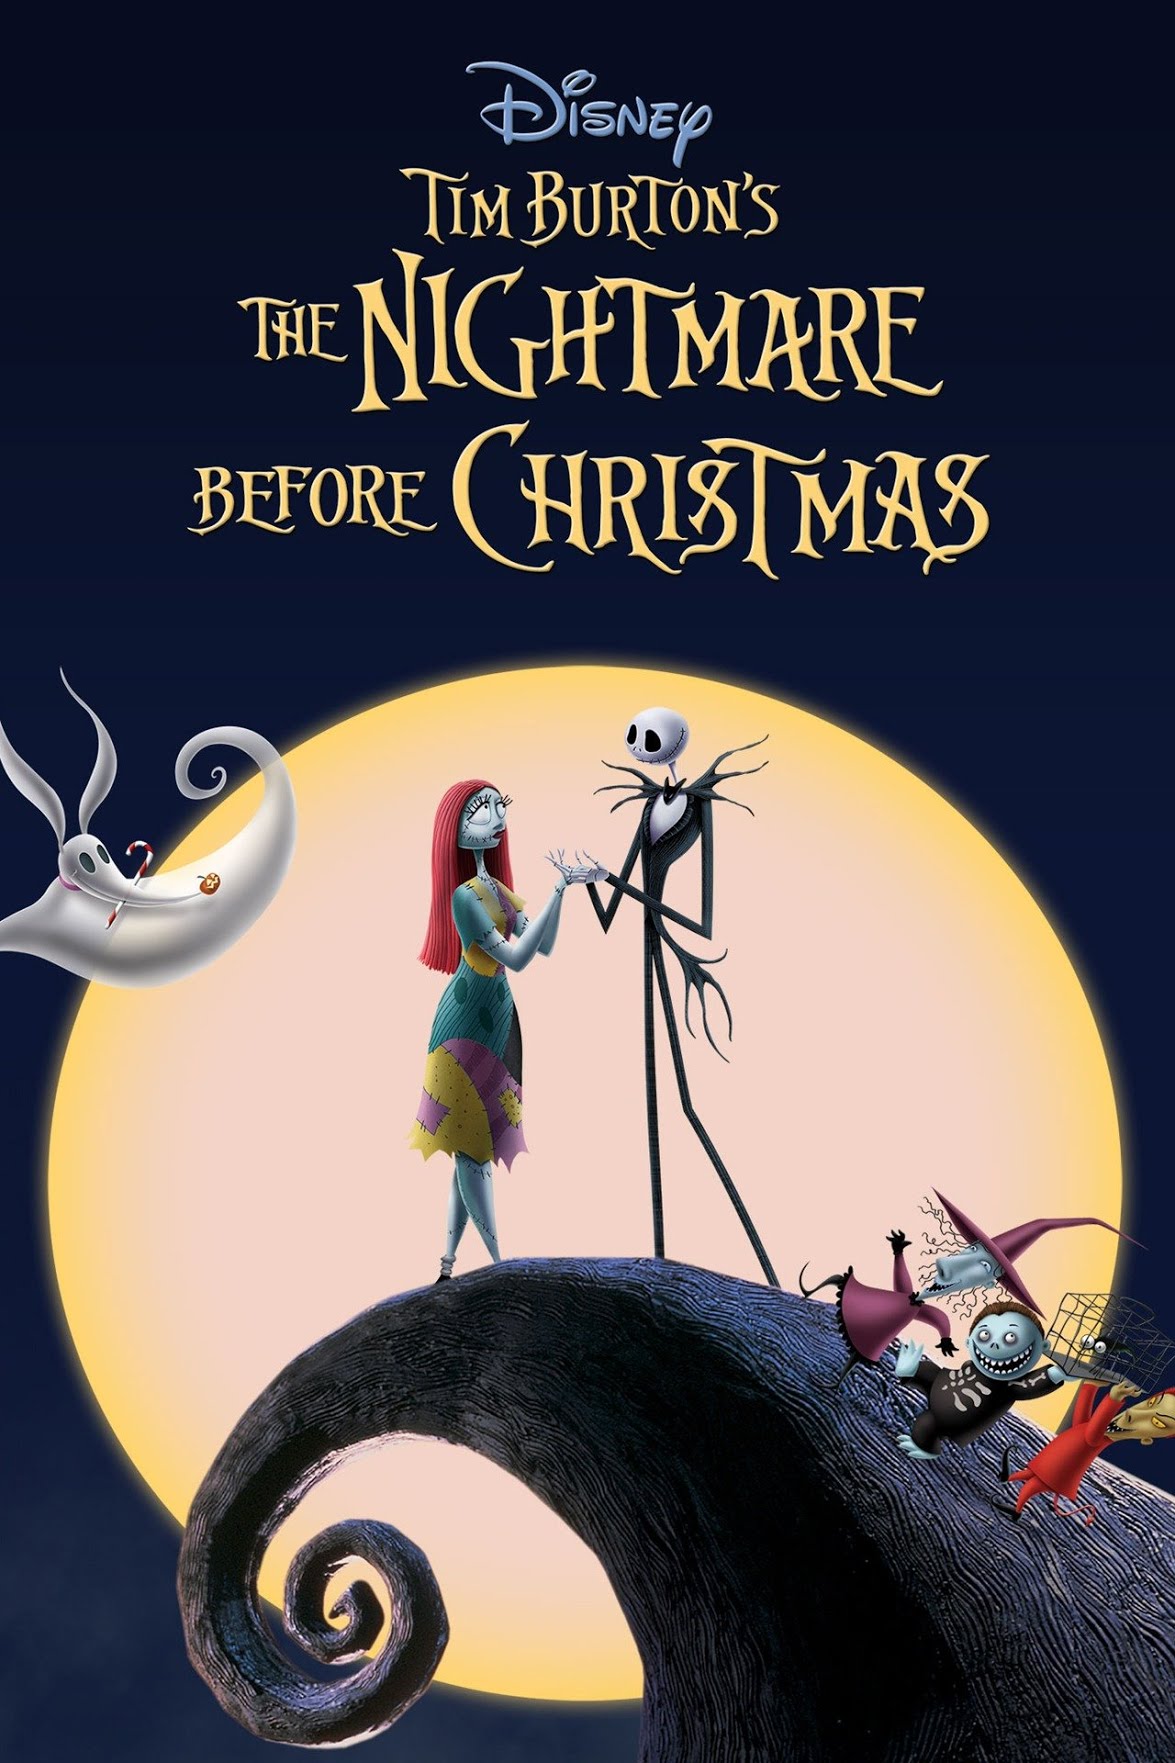 Image of the Movie Poster, Tim Burton's Nightmare Before Christmas featuring 2 skeletons holding hands with a full moon behind them.